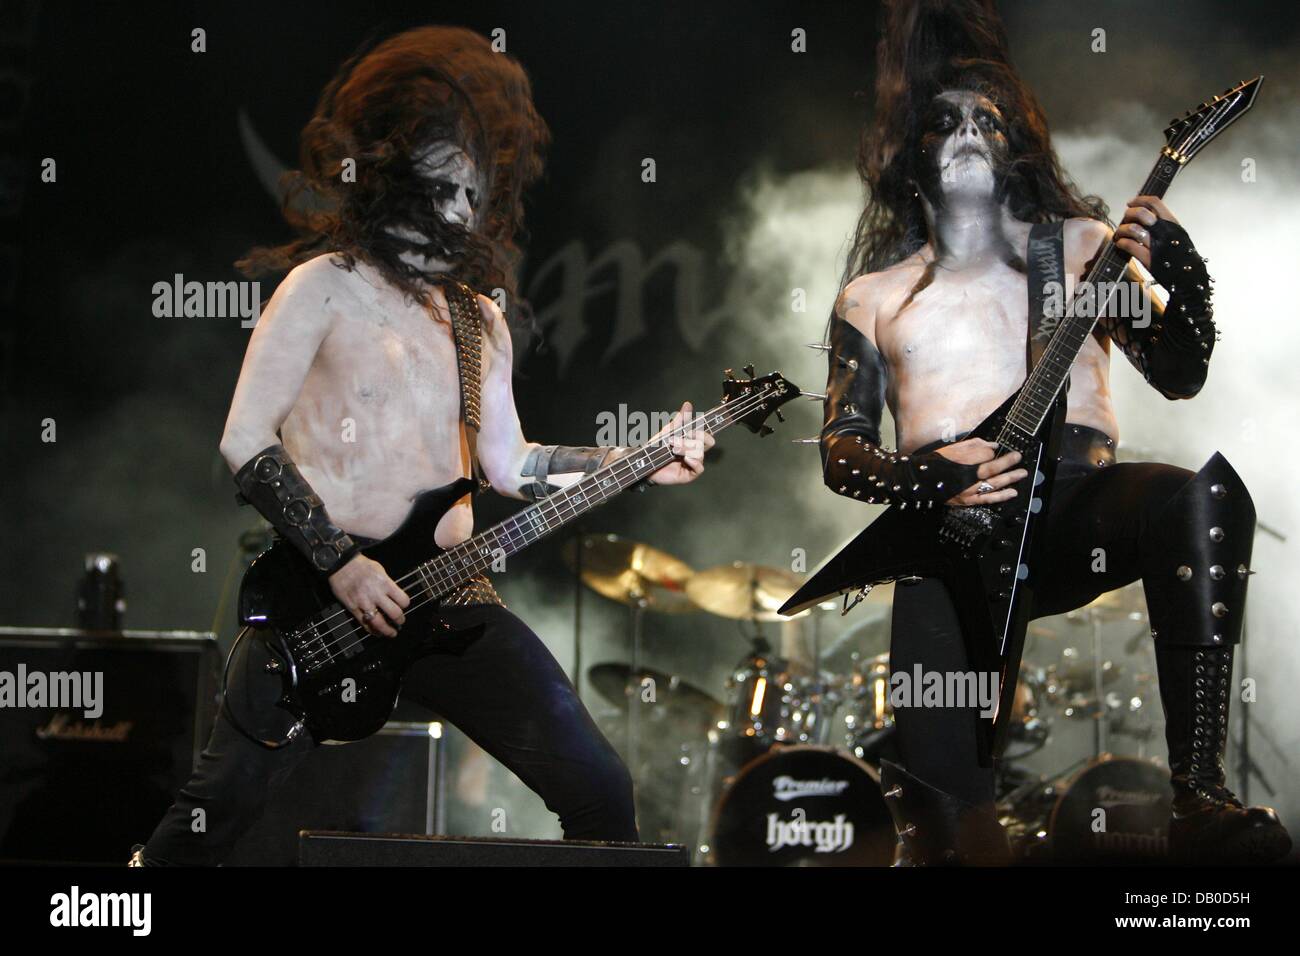 The singer and guitarist of the Norwegian black metal band 'Immortal' Olve 'Abbath' Eikemo is pictured on stage  together with the band's bassist Apollyon (L) at the Wacken Open Air Festival in Wacken, Germany, 04 August 2007. Photo: Sebastian Widmann Stock Photo